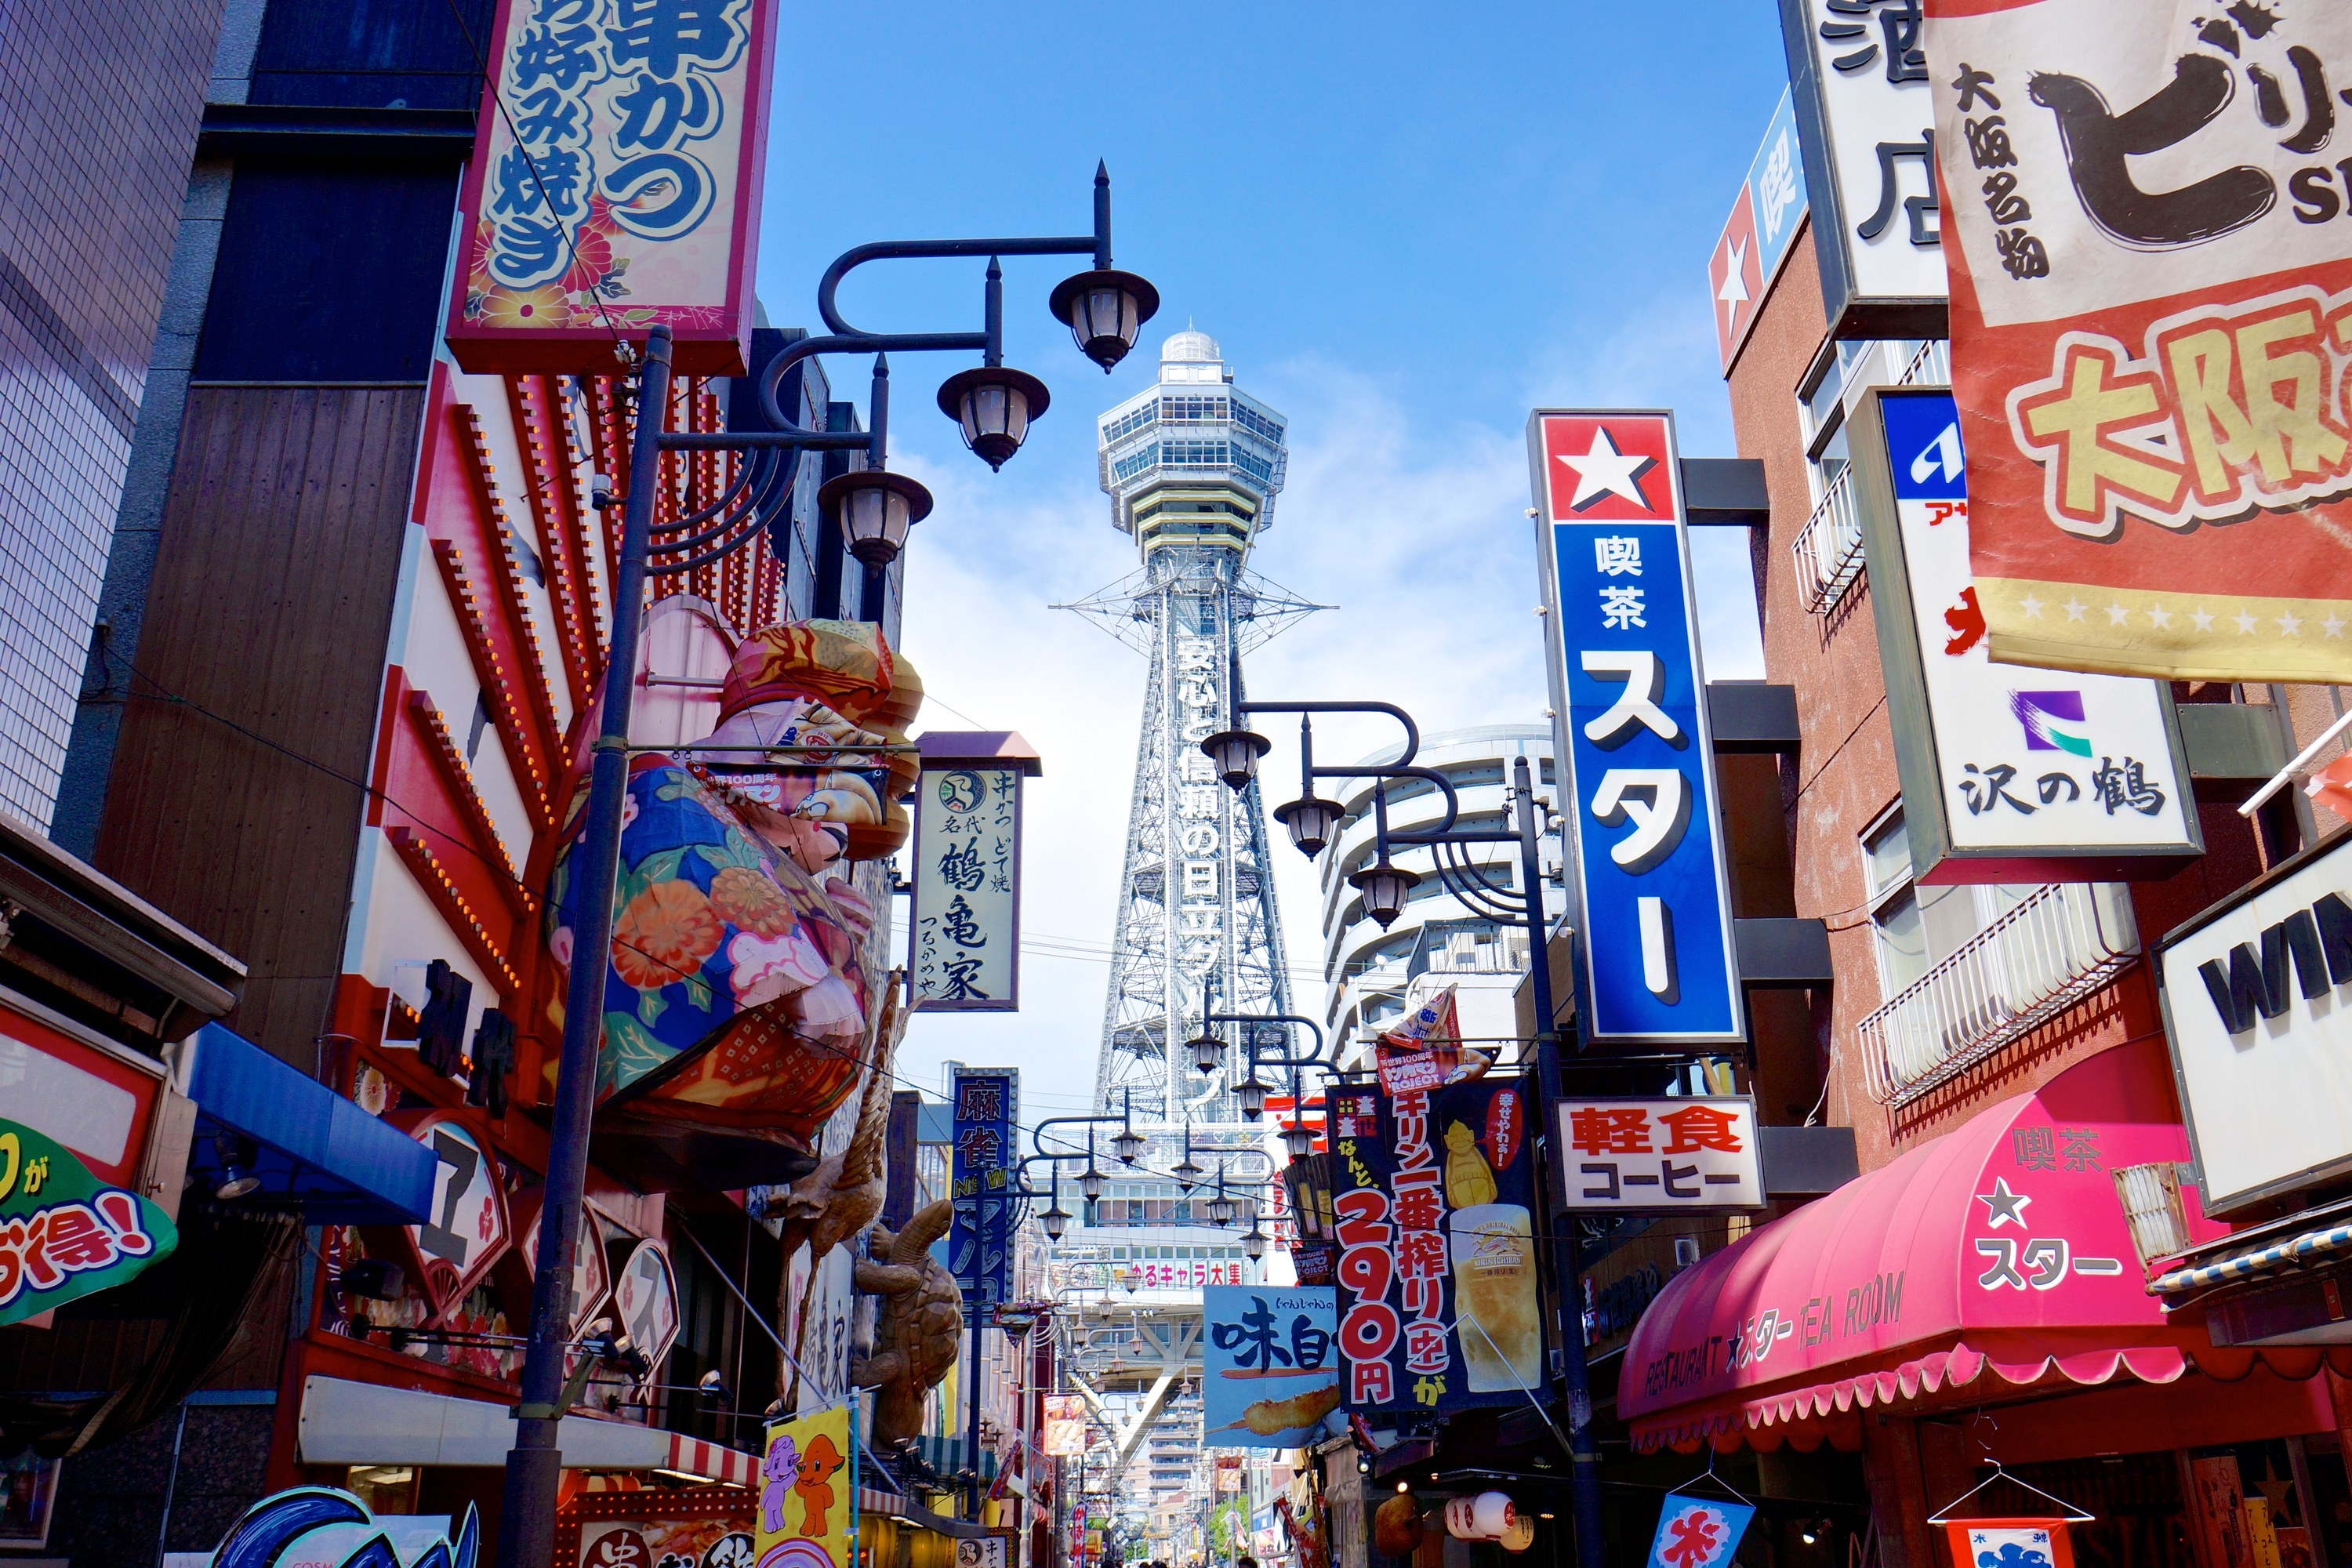 Colorful and showy signs of shops and restaurants against the backdrop of the Tsutenkaku tower